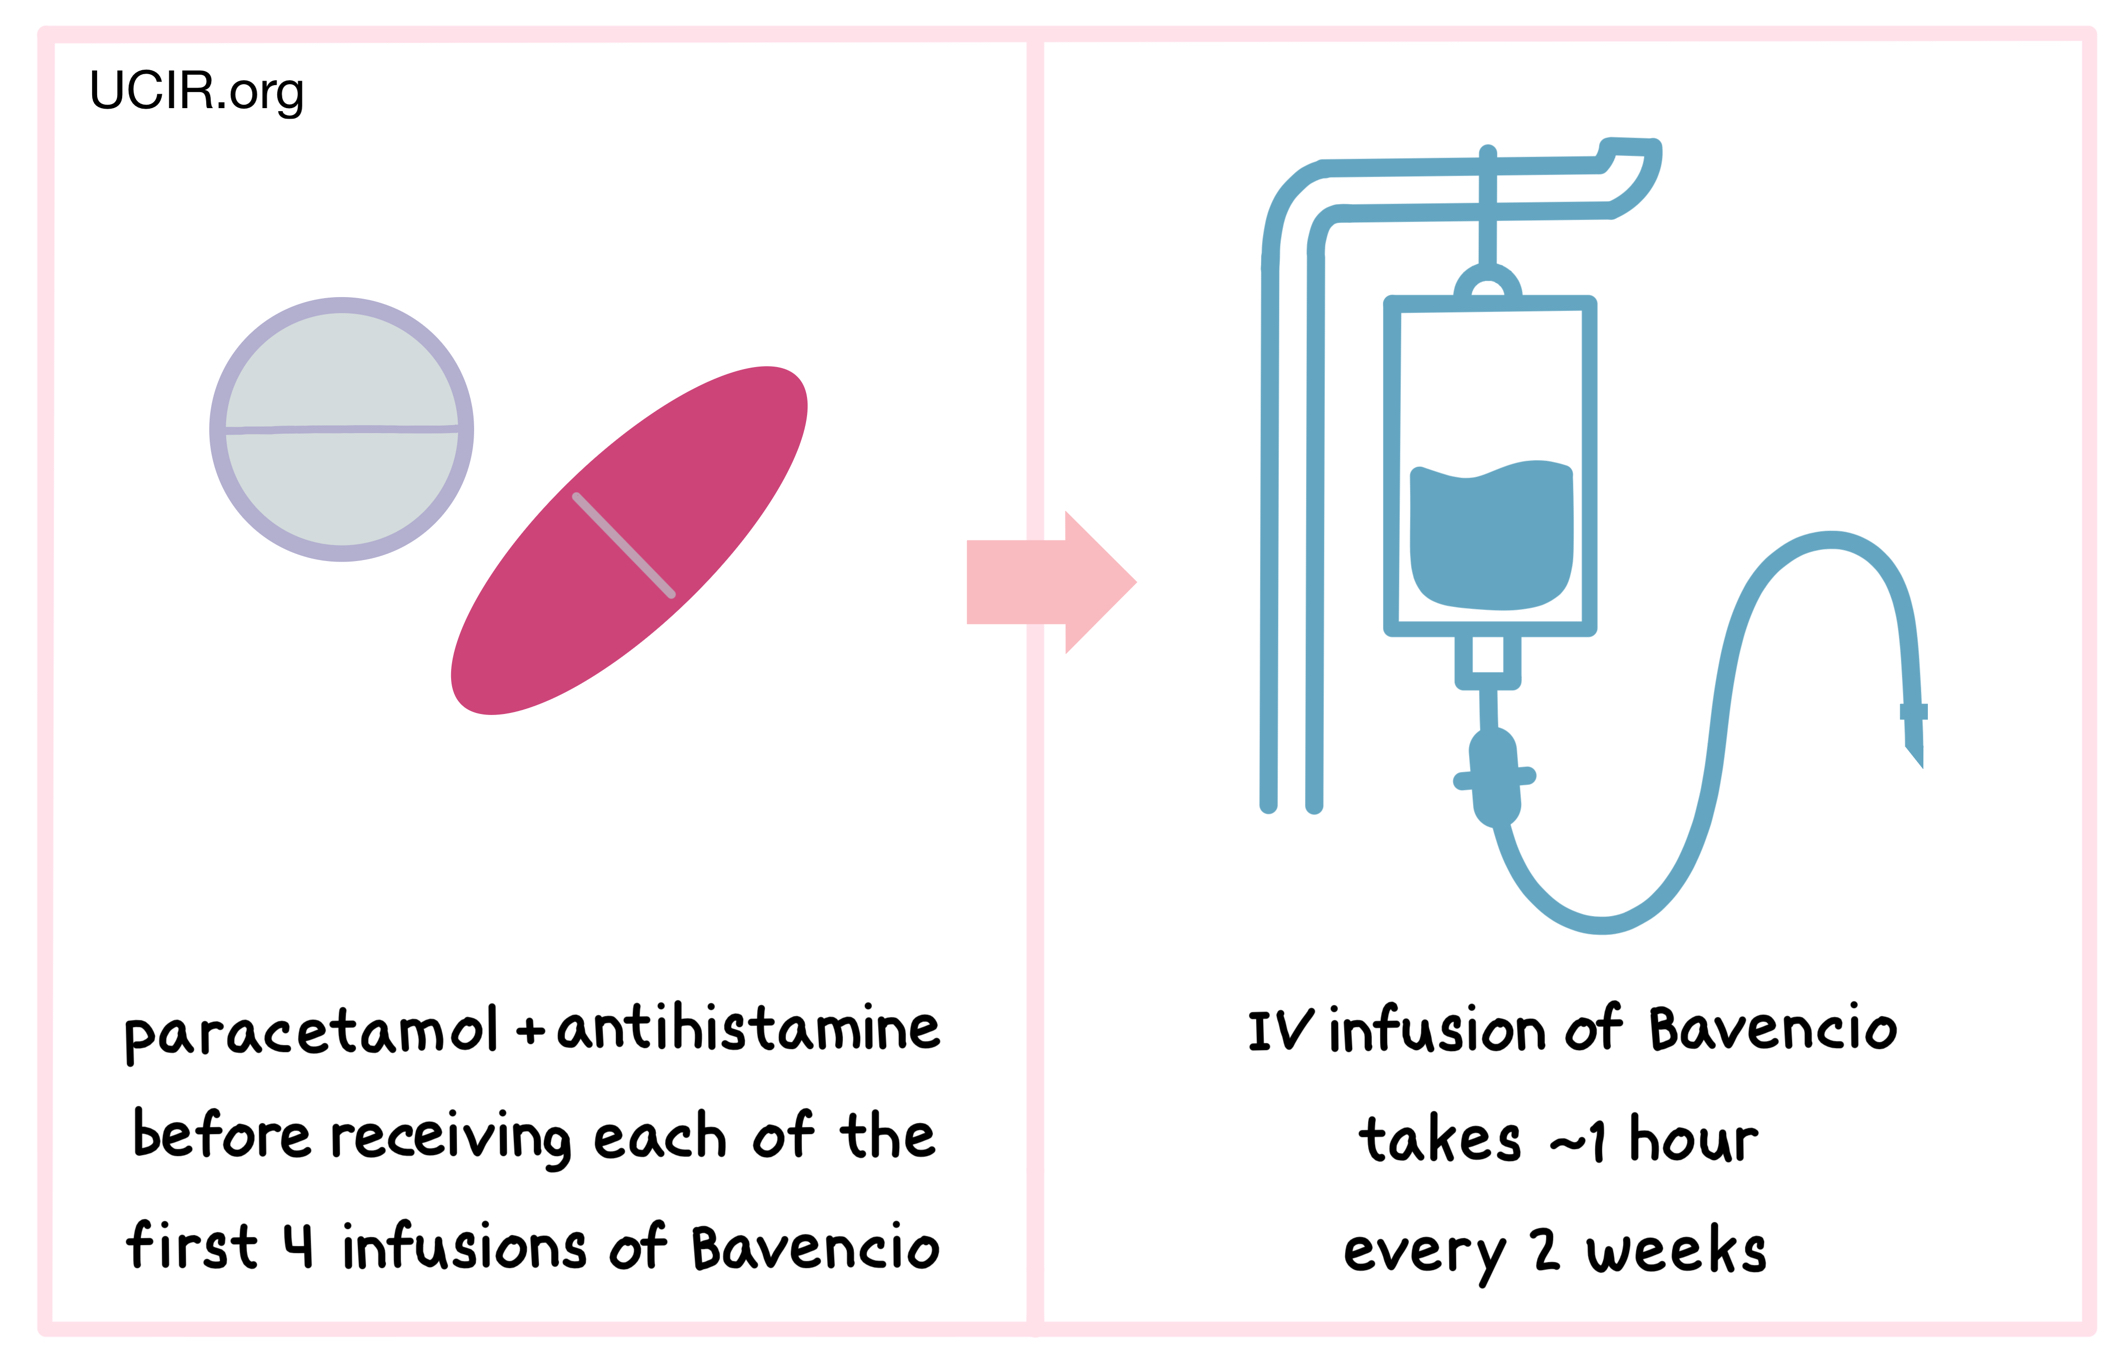 Illustration of how Bavencio is administered to patients